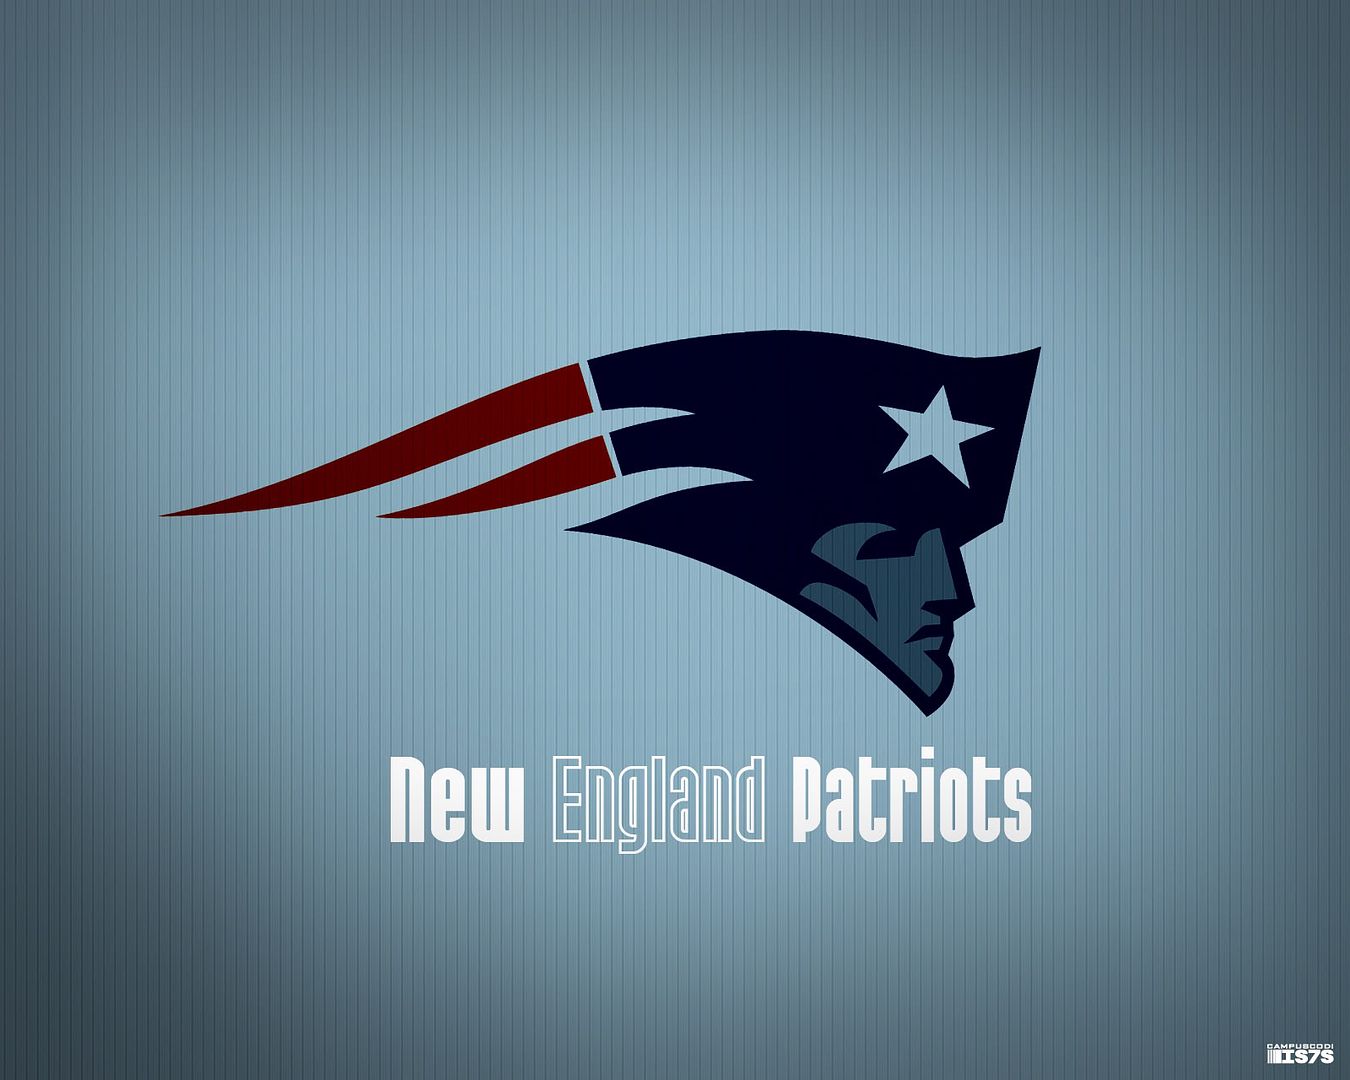 NEW ENGLAND PATRIOTS - Cool Graphic